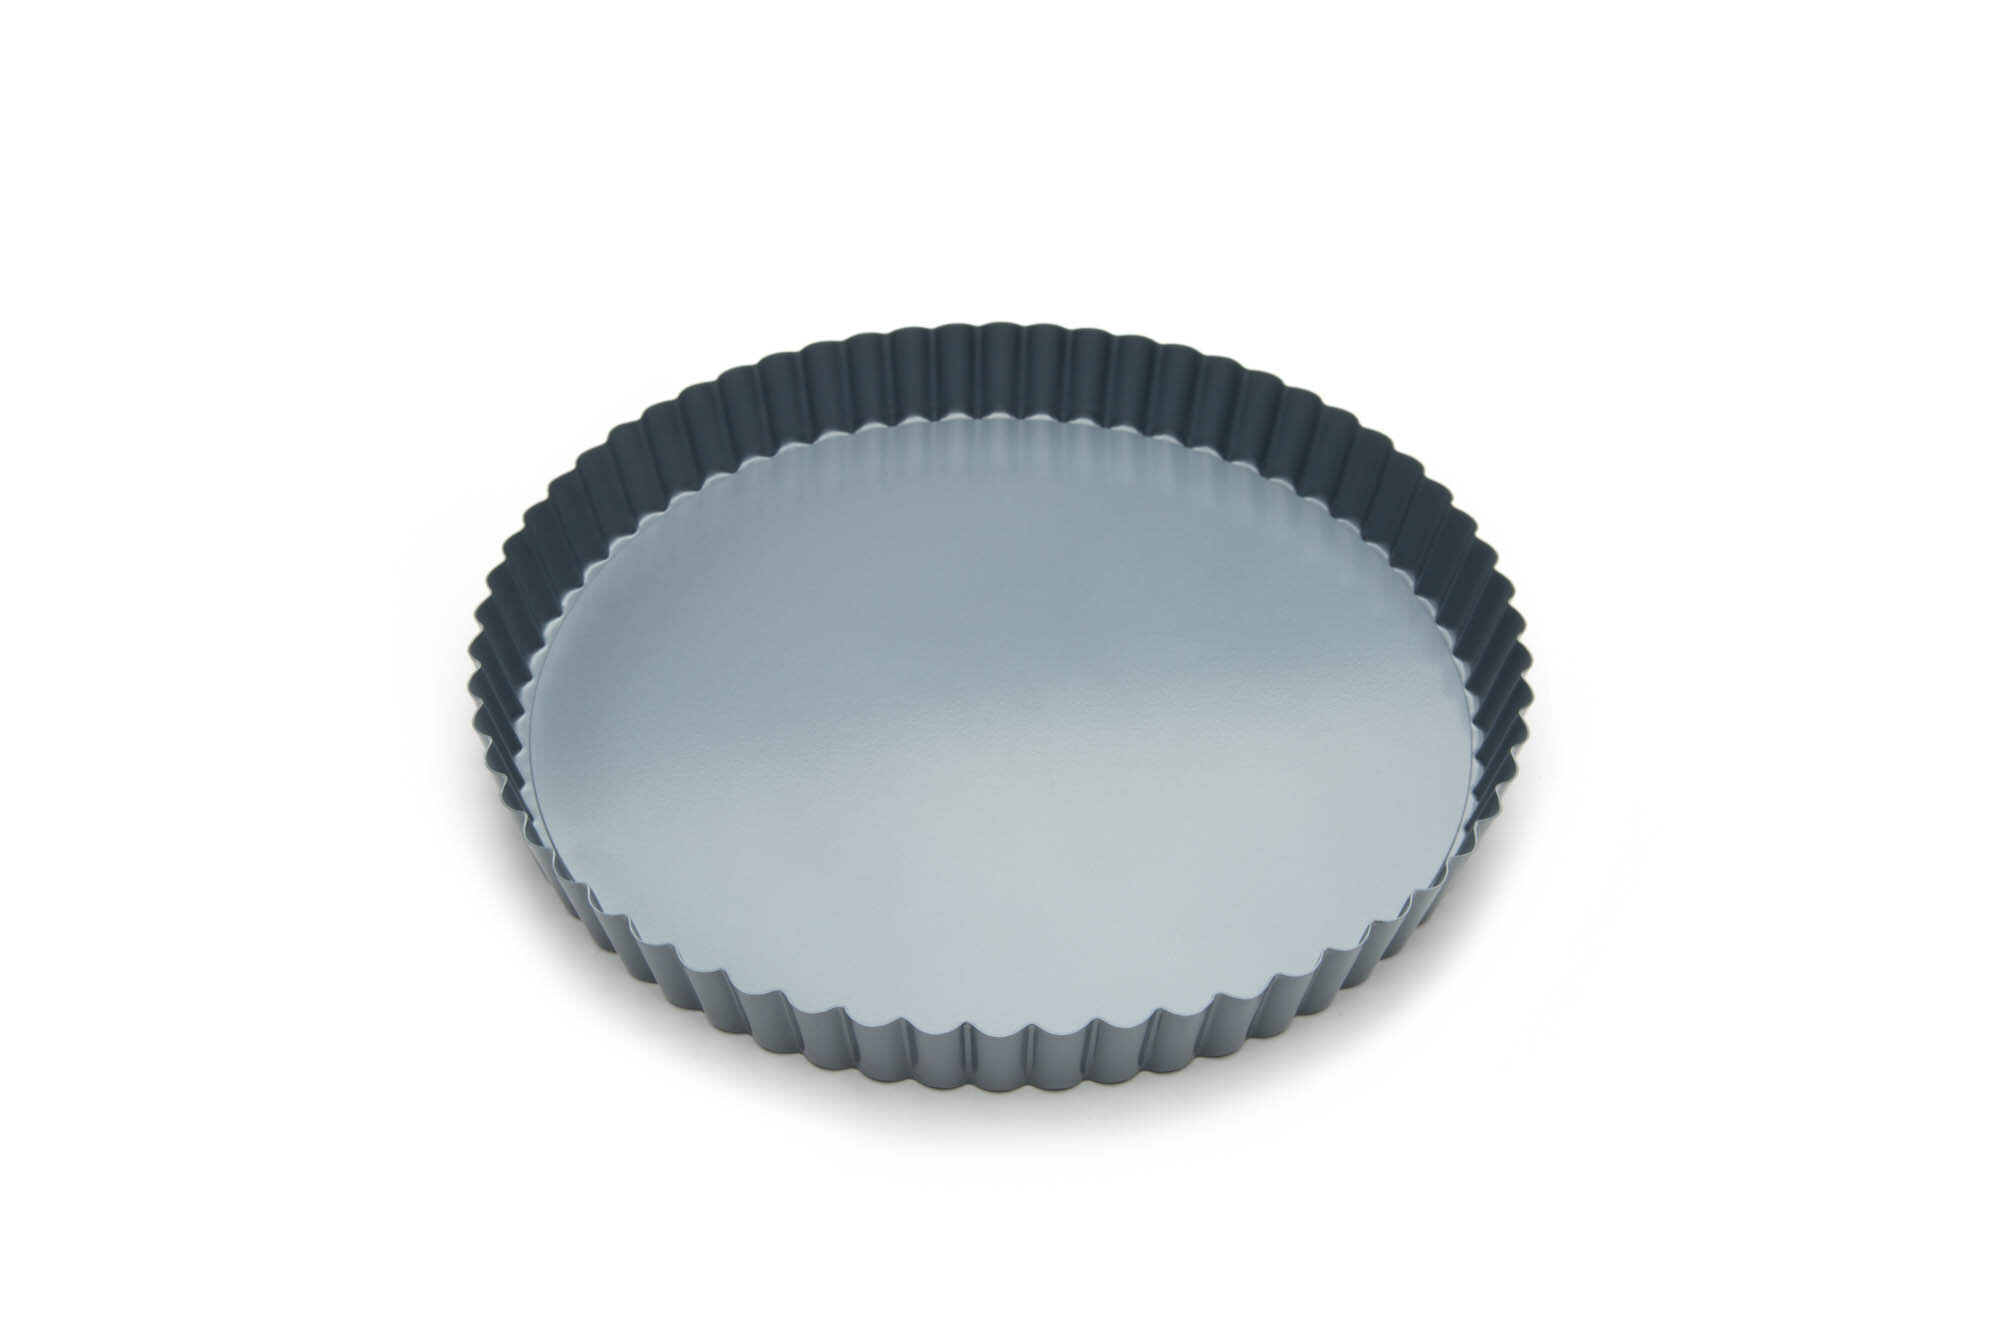 Winco 10-Inch Spring Form Cake Pan with Loose Bottom